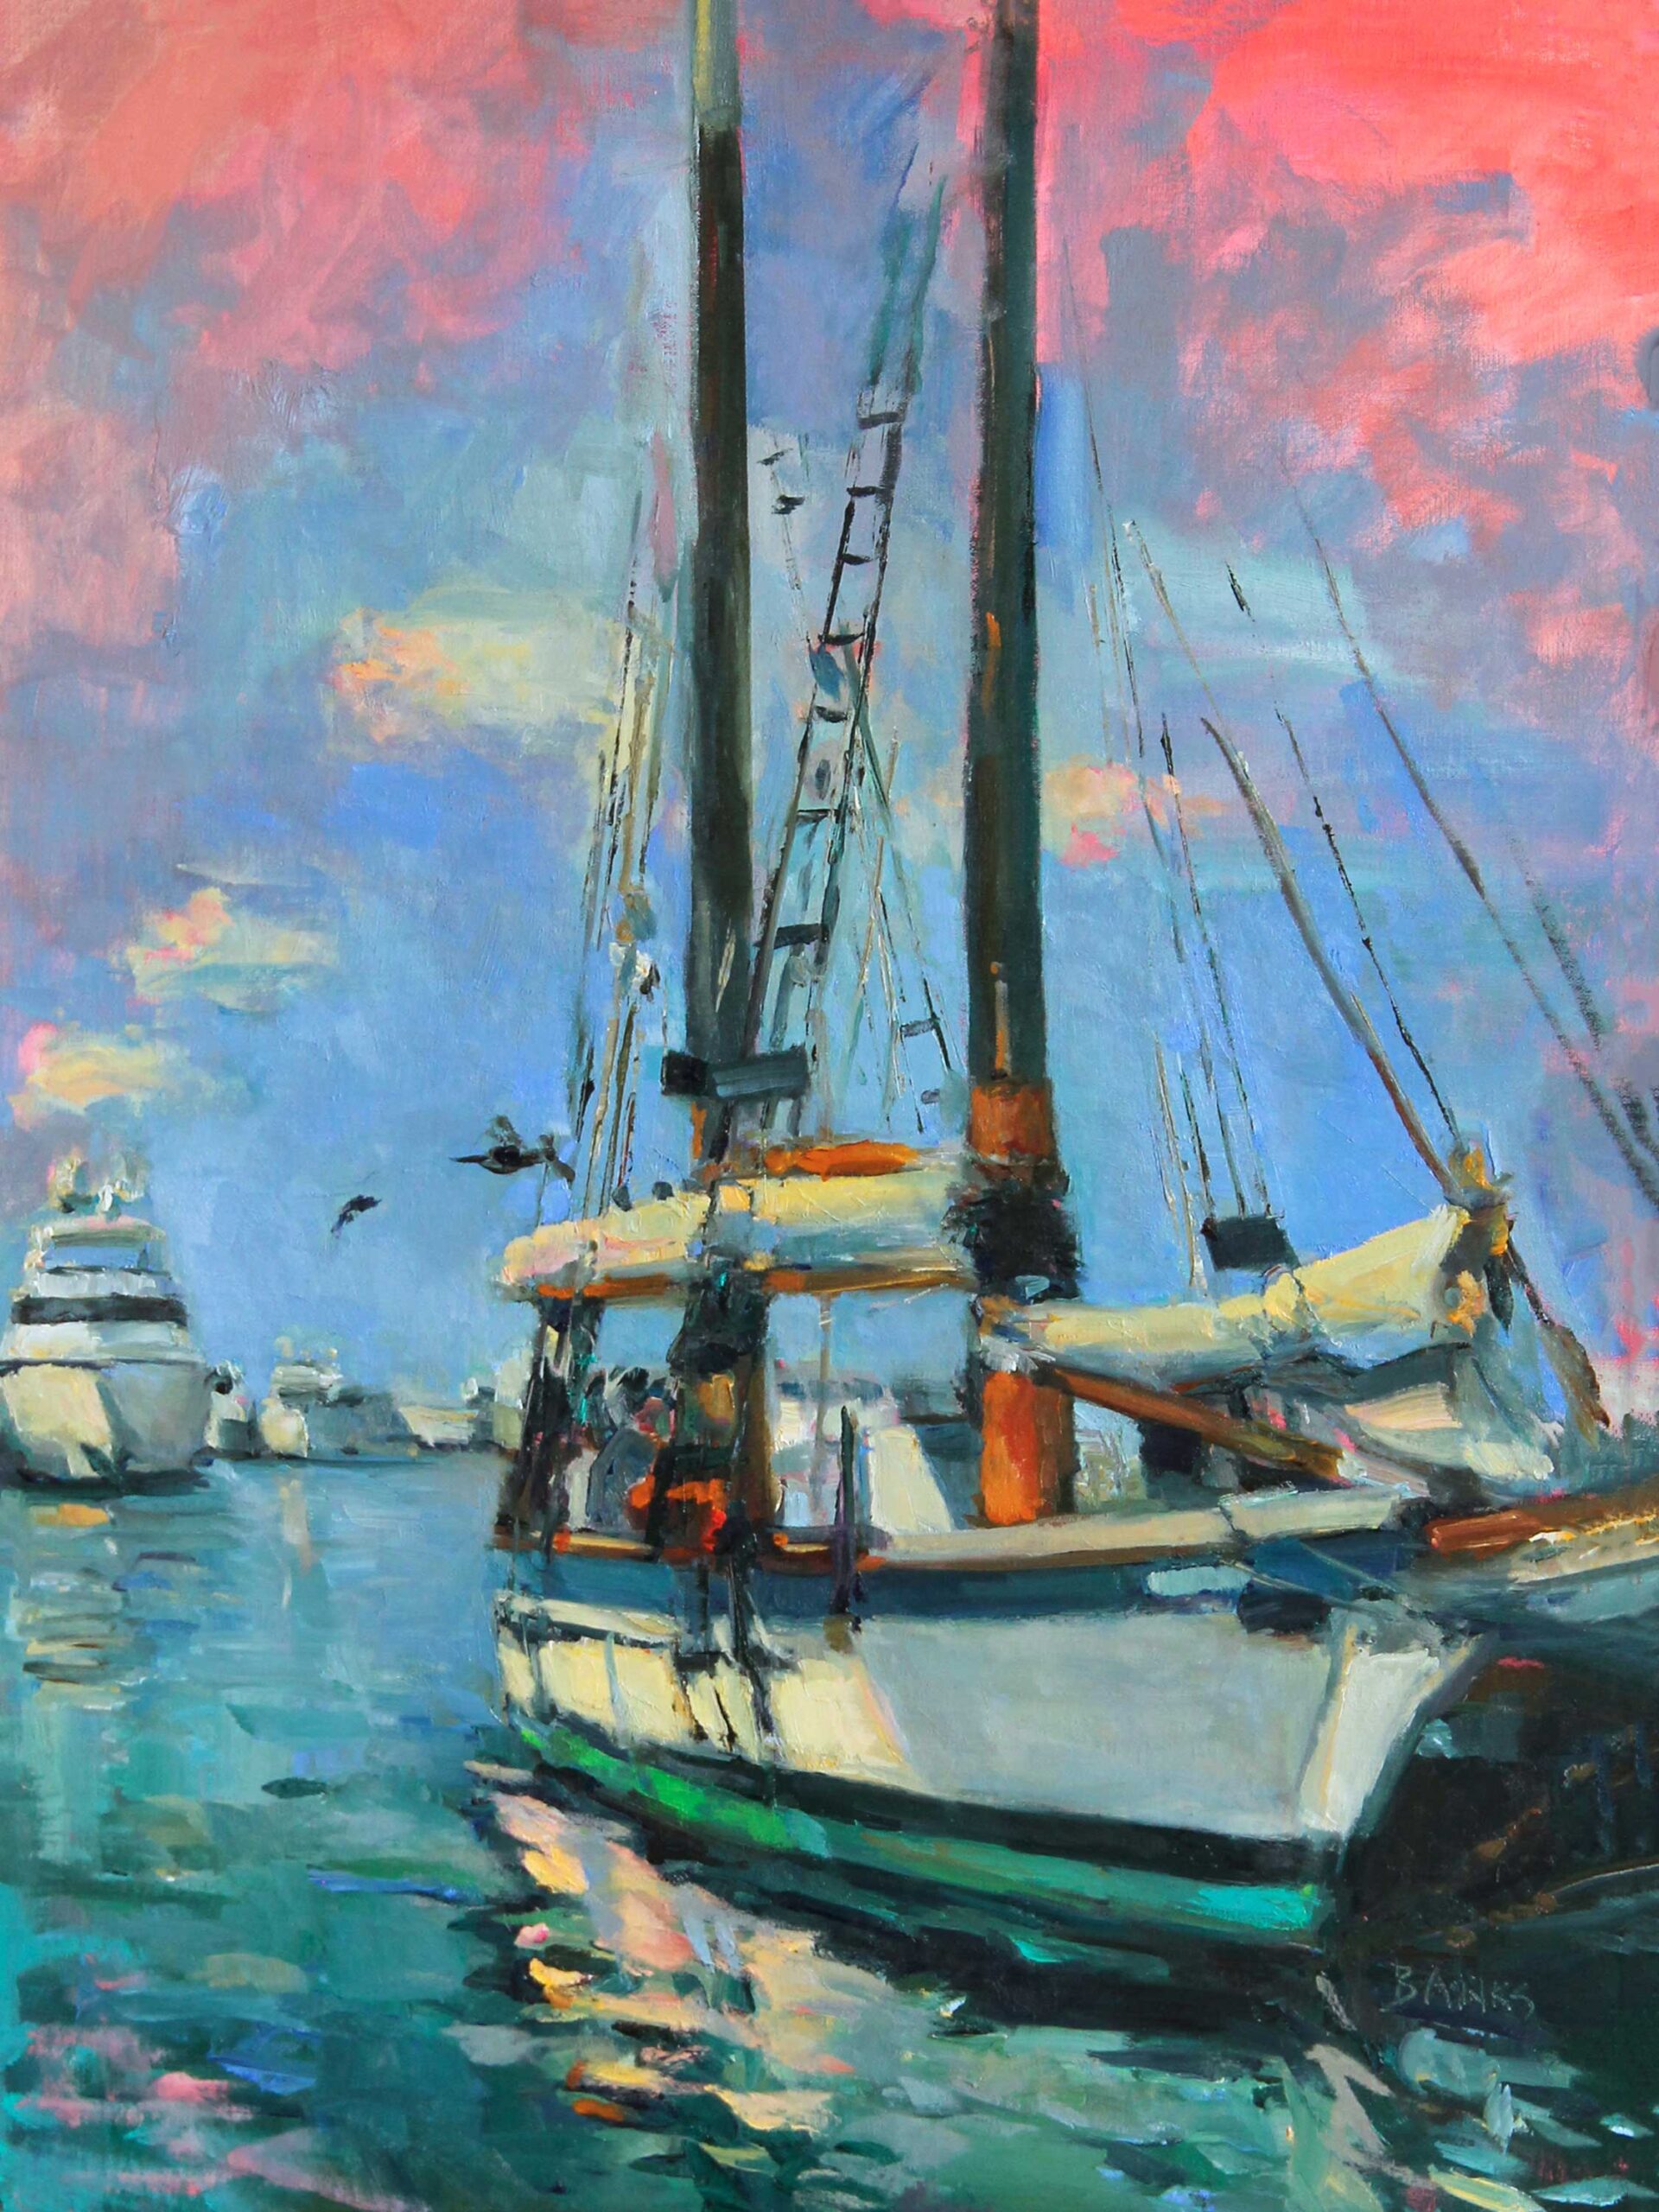 8. Jill Banks, “Set to Sail,” 2024, oil, 24 x 18 in., Private collection, Plein air